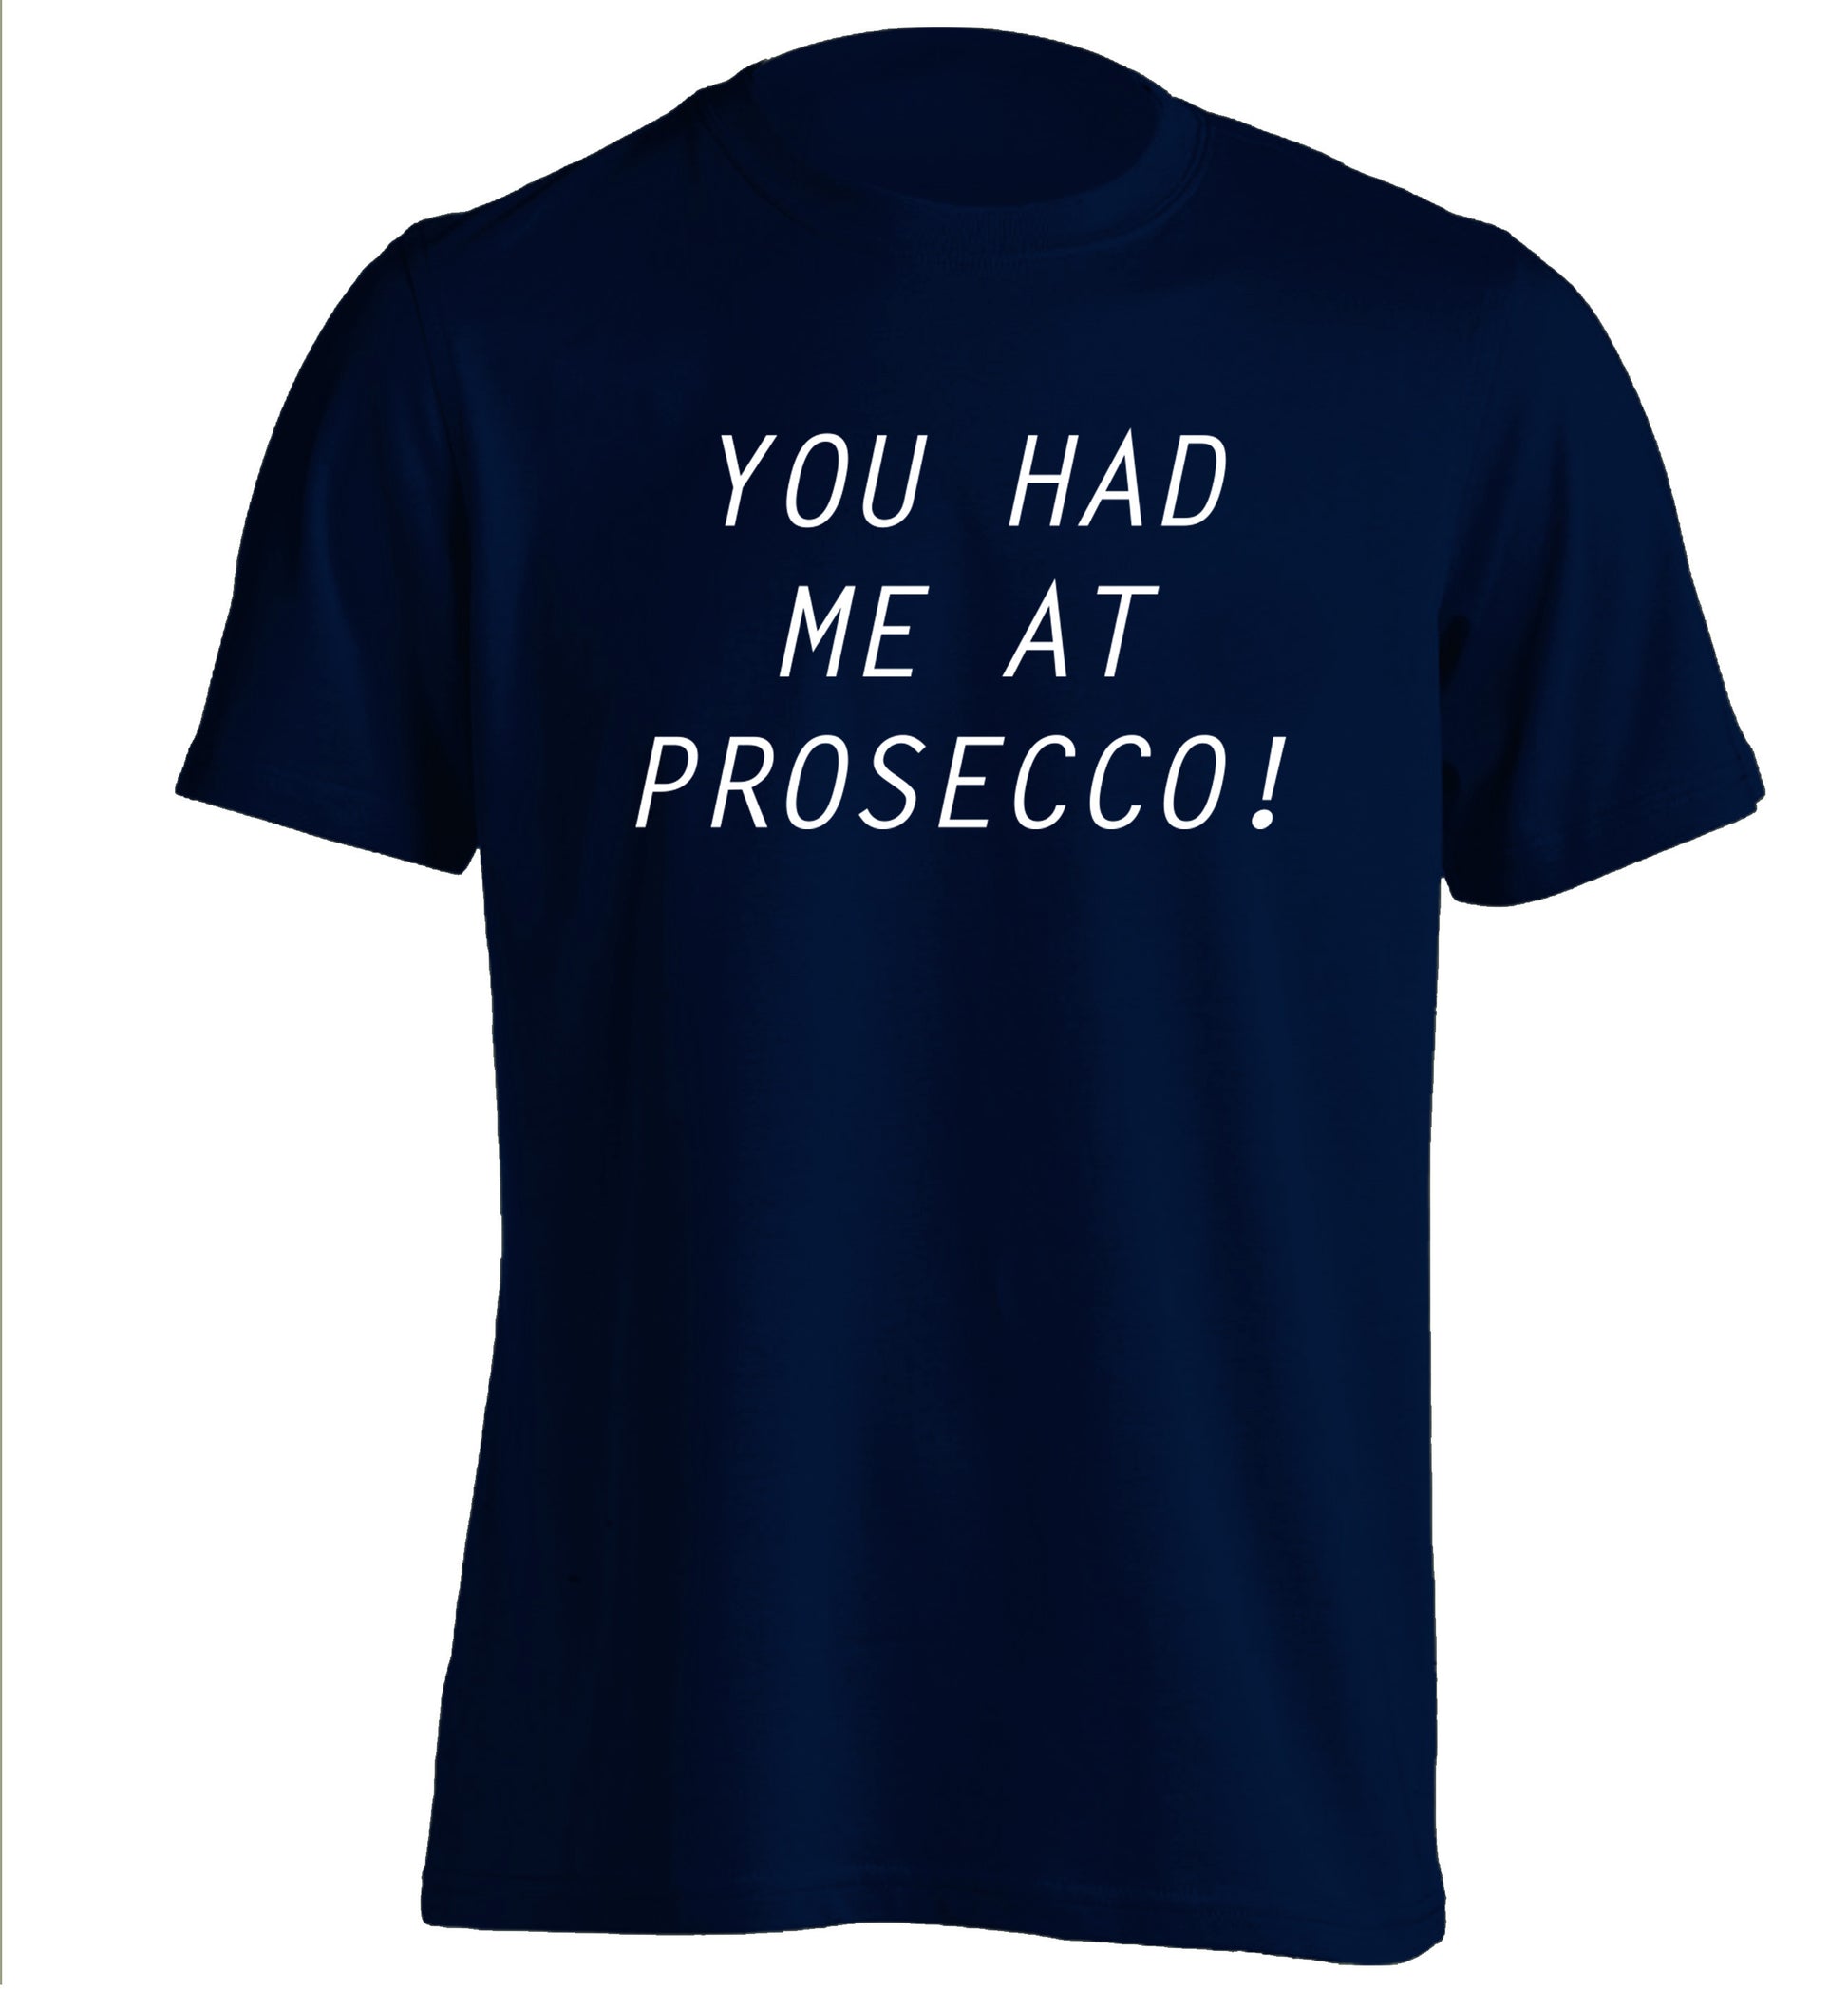 You had me at prosecco adults unisex navy Tshirt 2XL